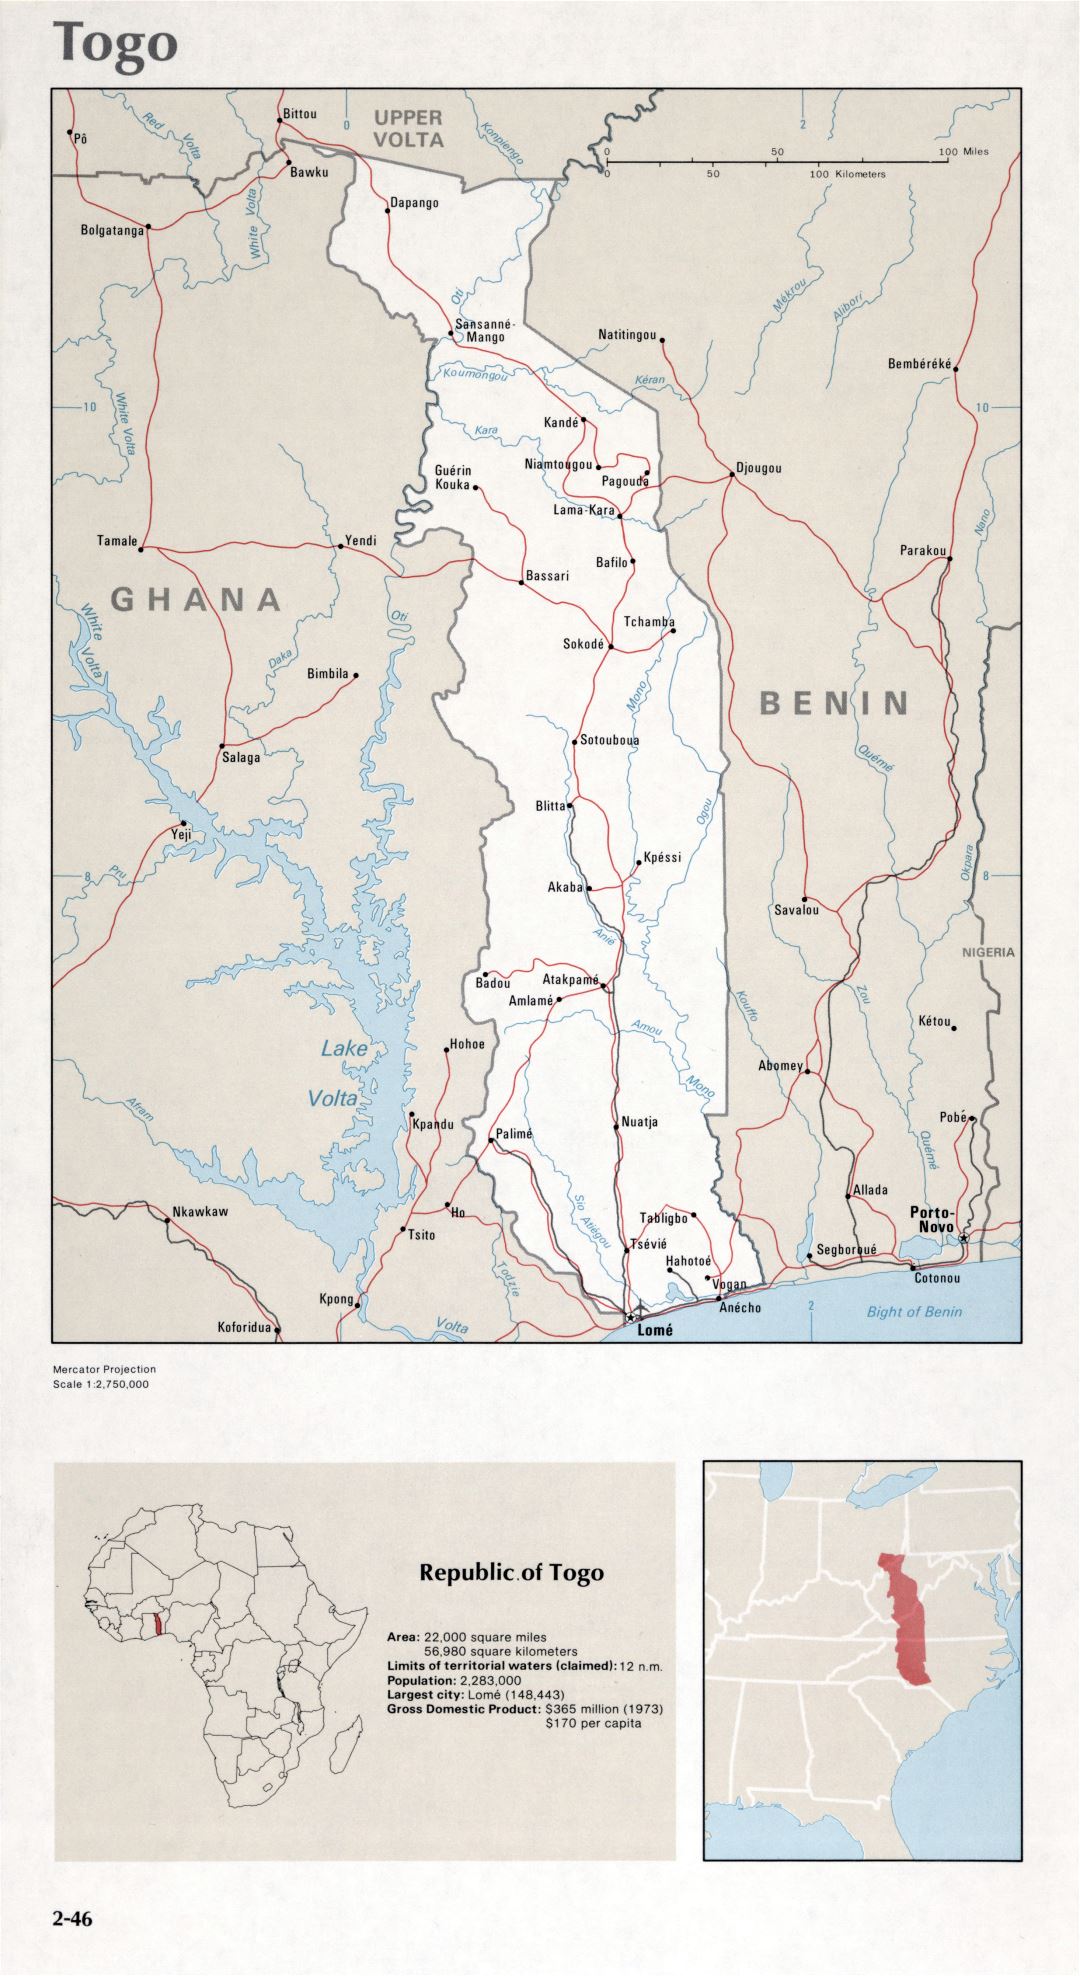 Map of Togo (2-46)